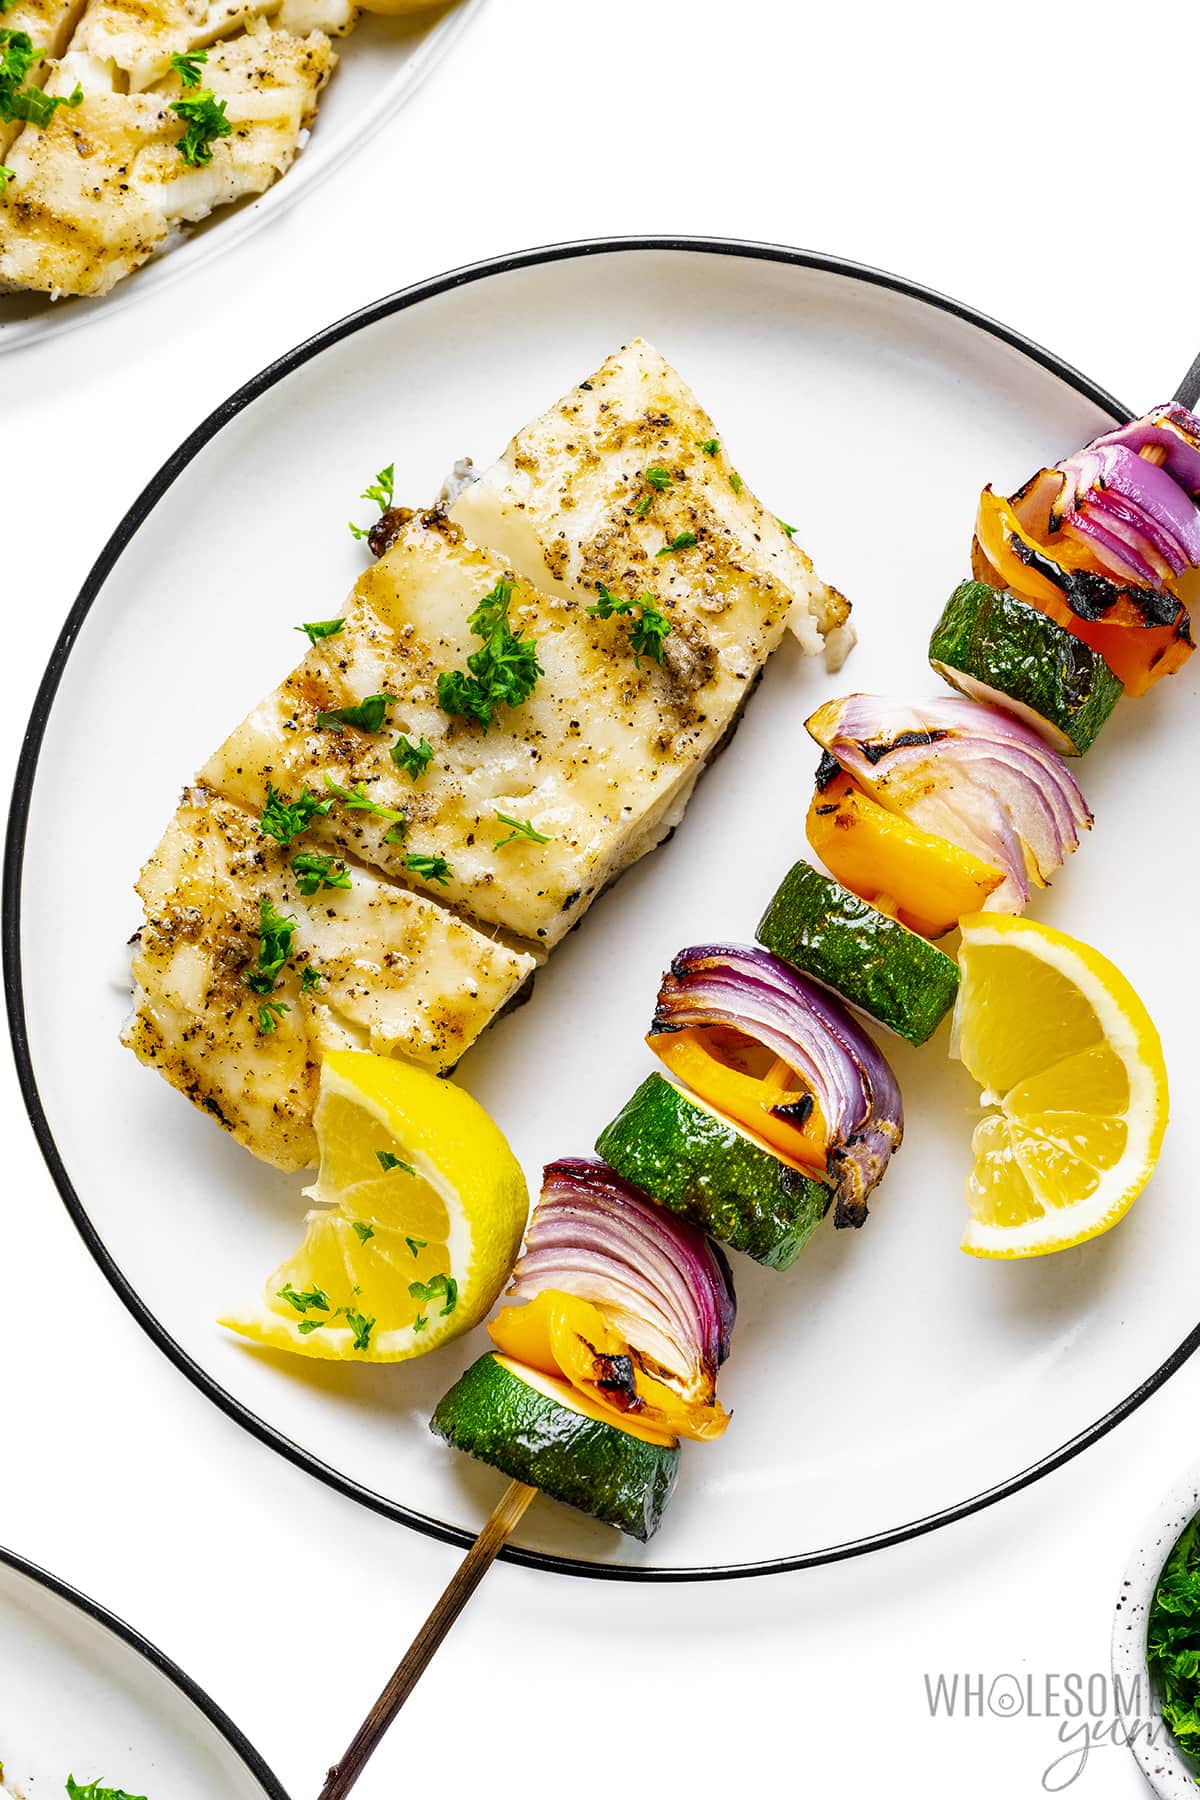 Grilled halibut on a plate with a vegetable skewer.